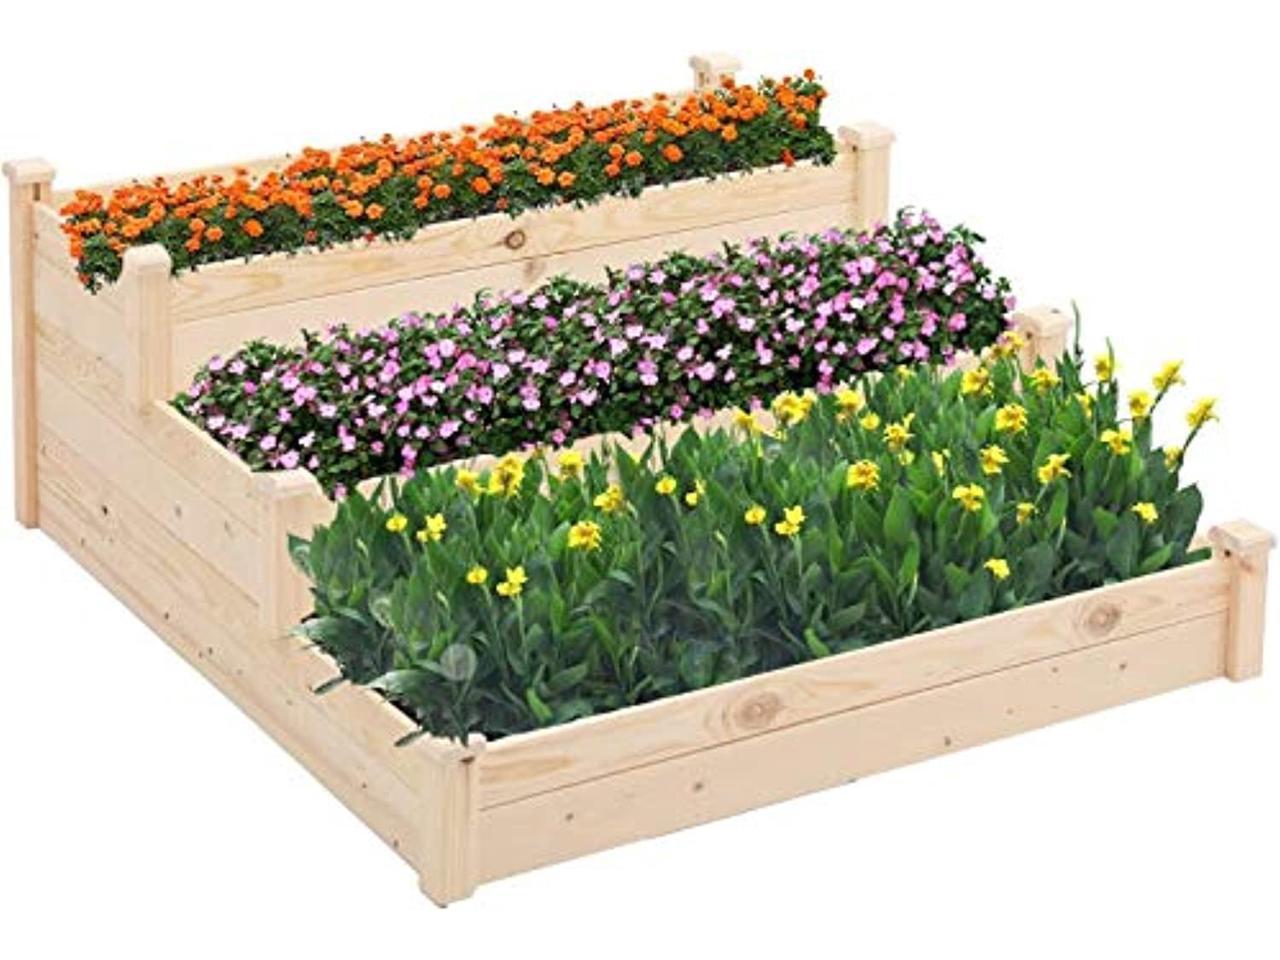 Solaura Outdoor 8 ft Wooden Planting Garden Bed Elevated Planter Box Kit Grow Vegetable/Flower/Herb Gardening Natural 